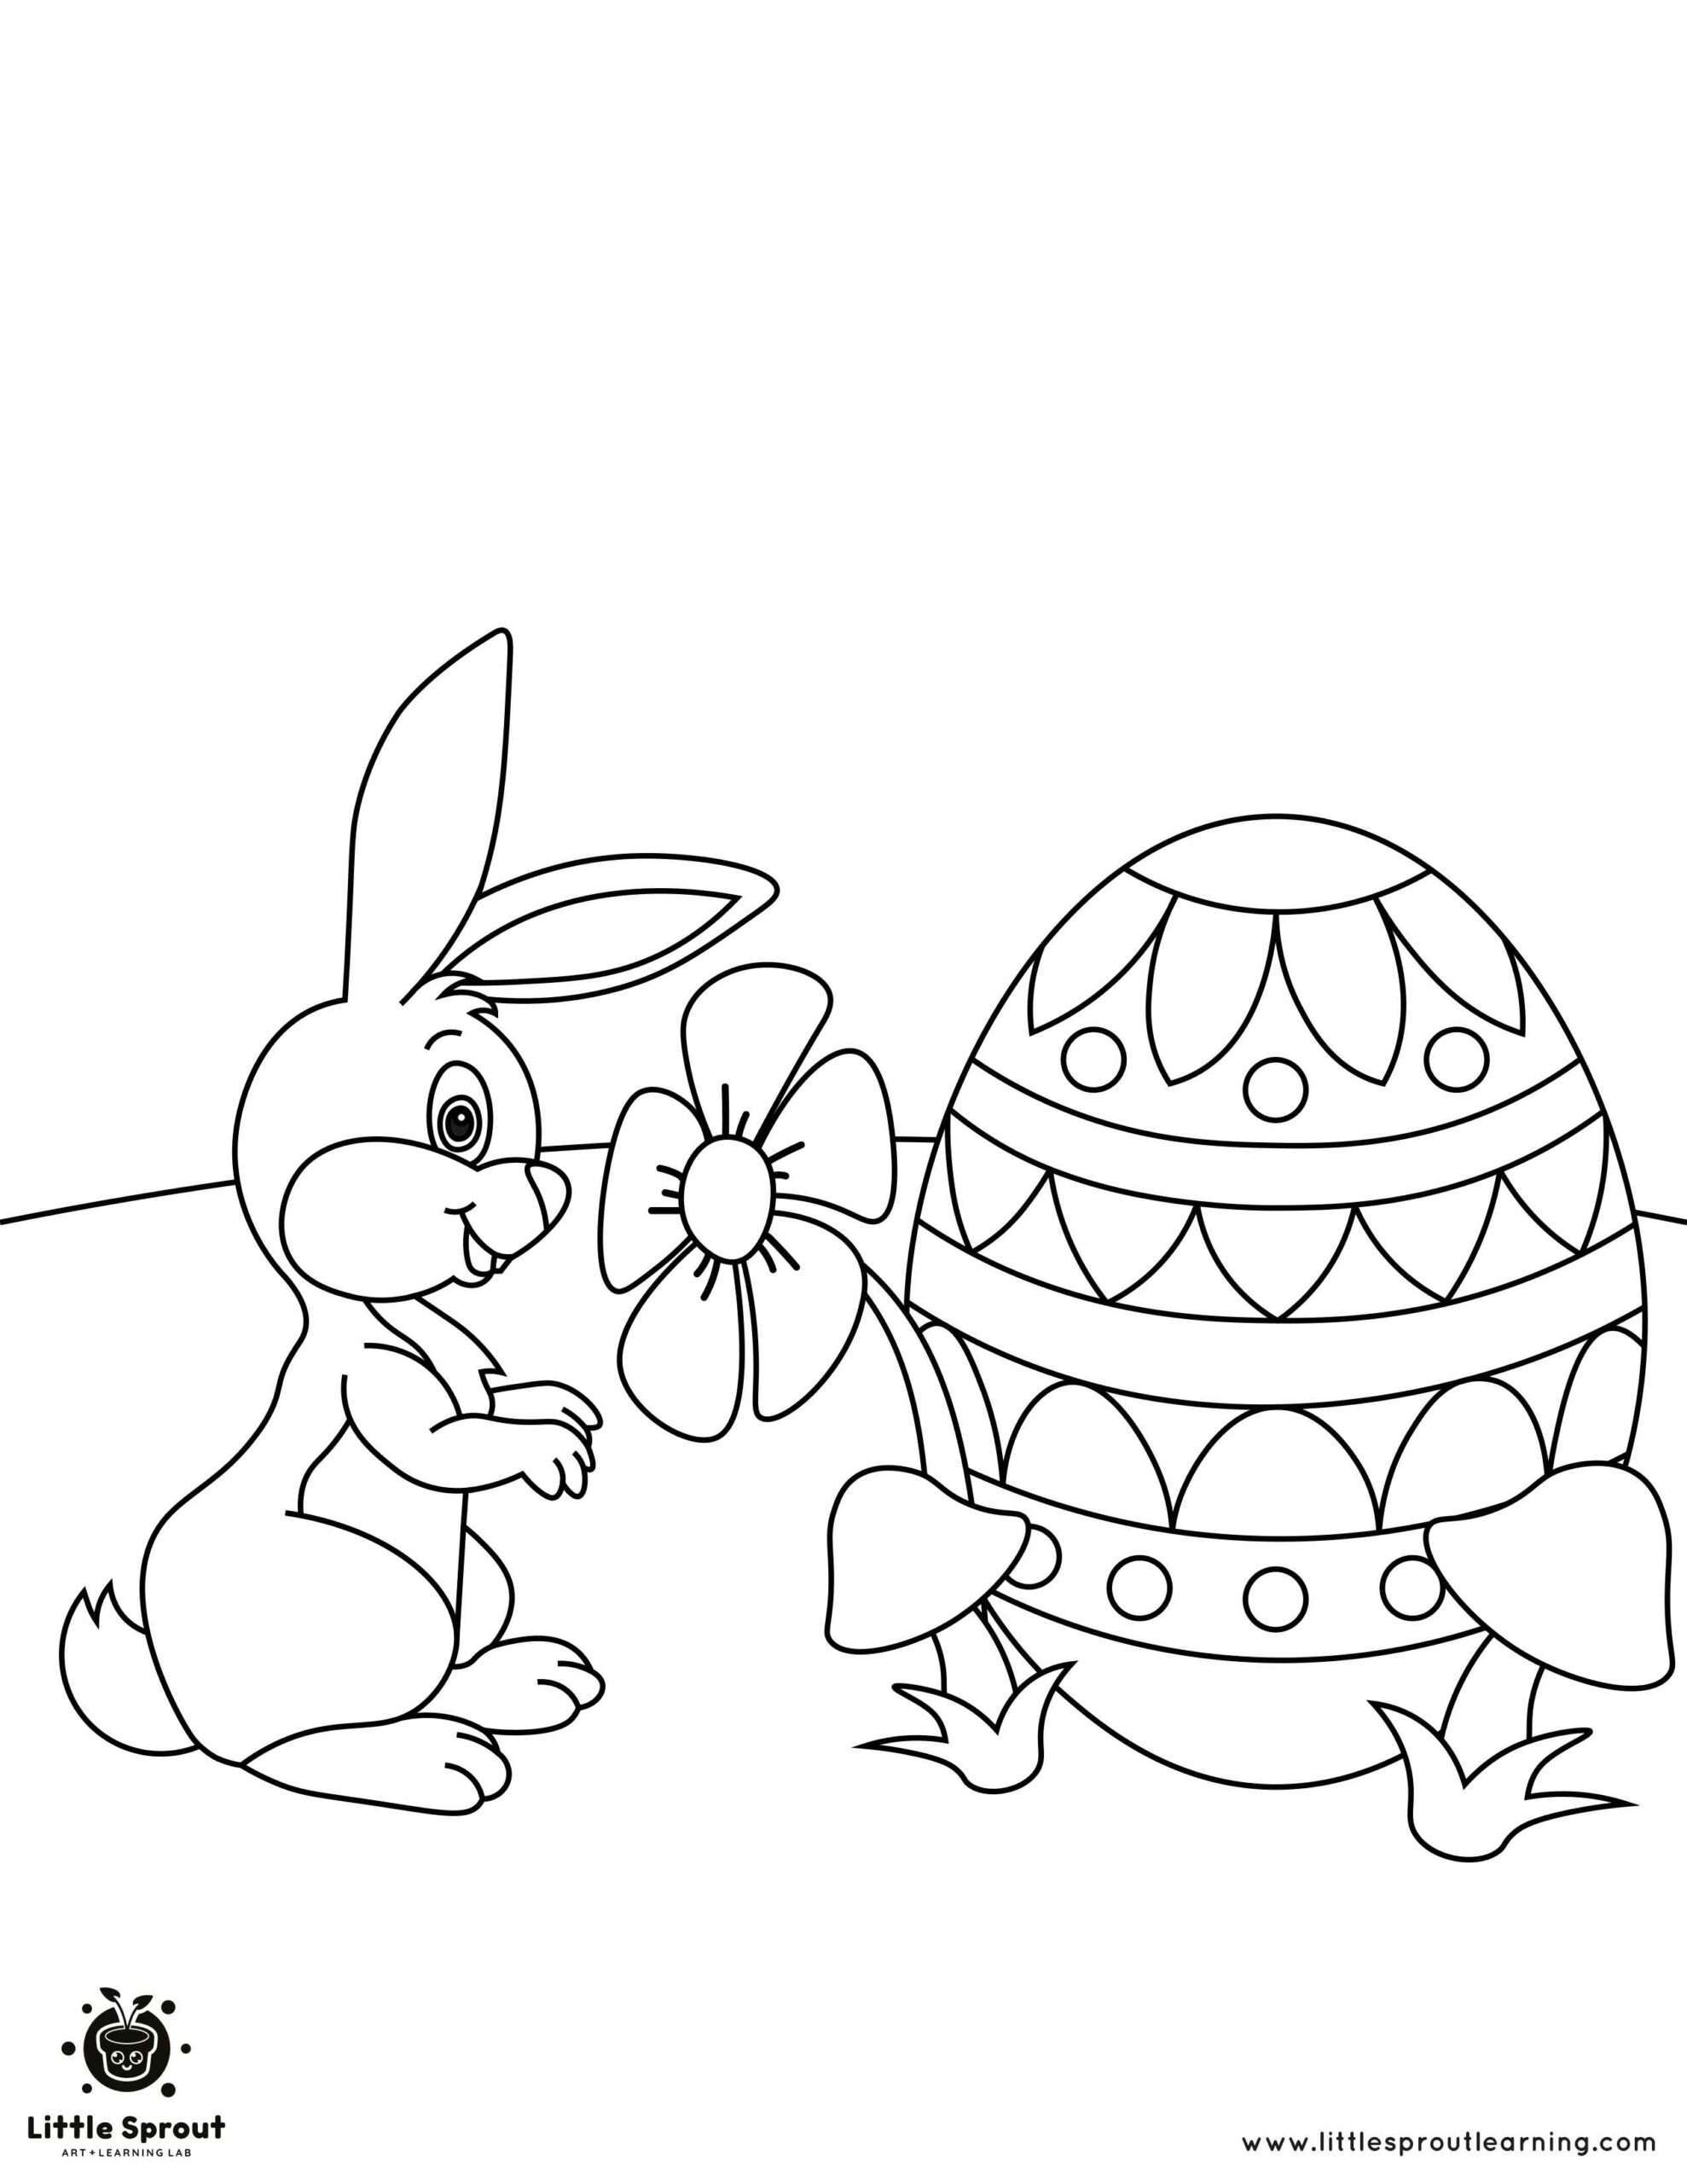 Hiding the Eggs Easter Coloring Page